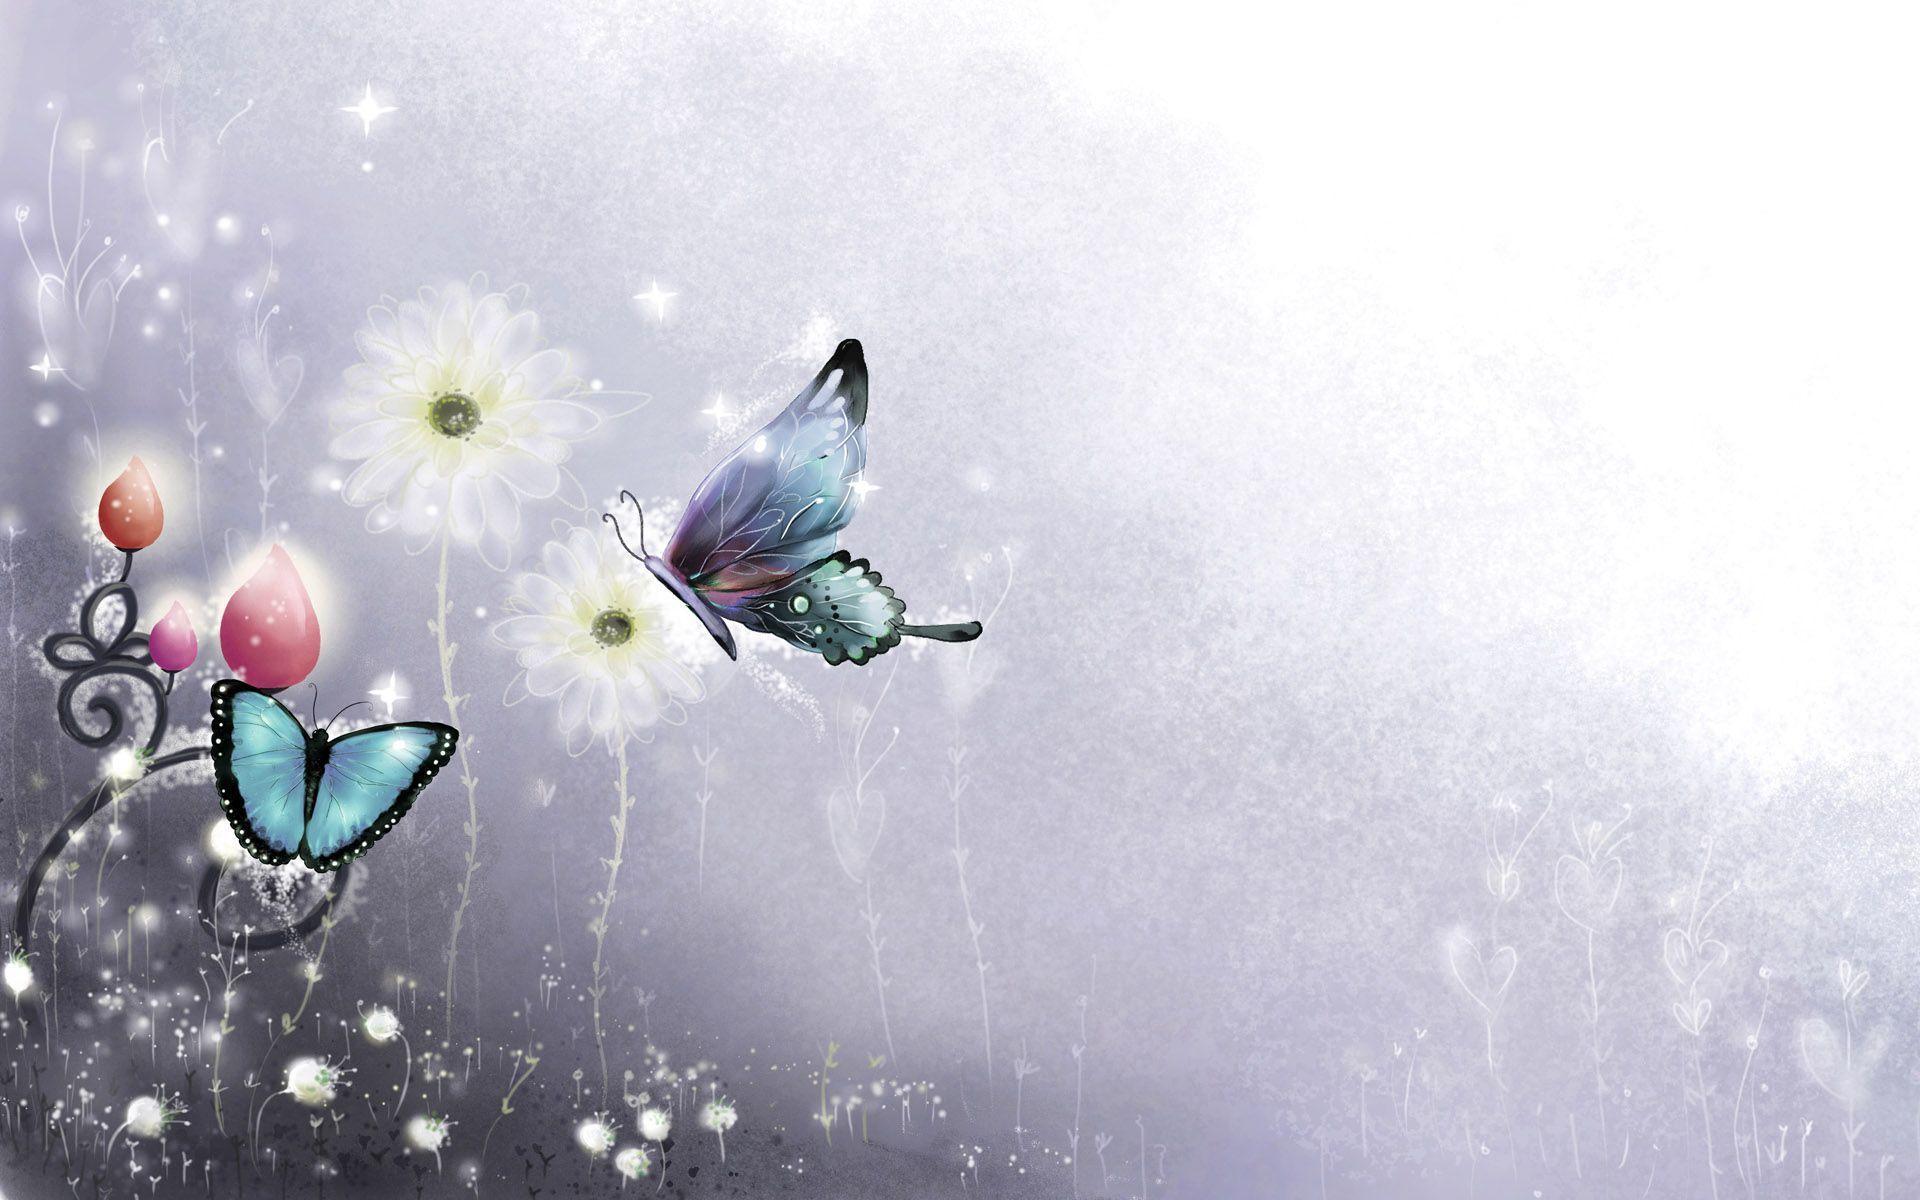 Animation Butterfly Wallpapers - Wallpaper Cave